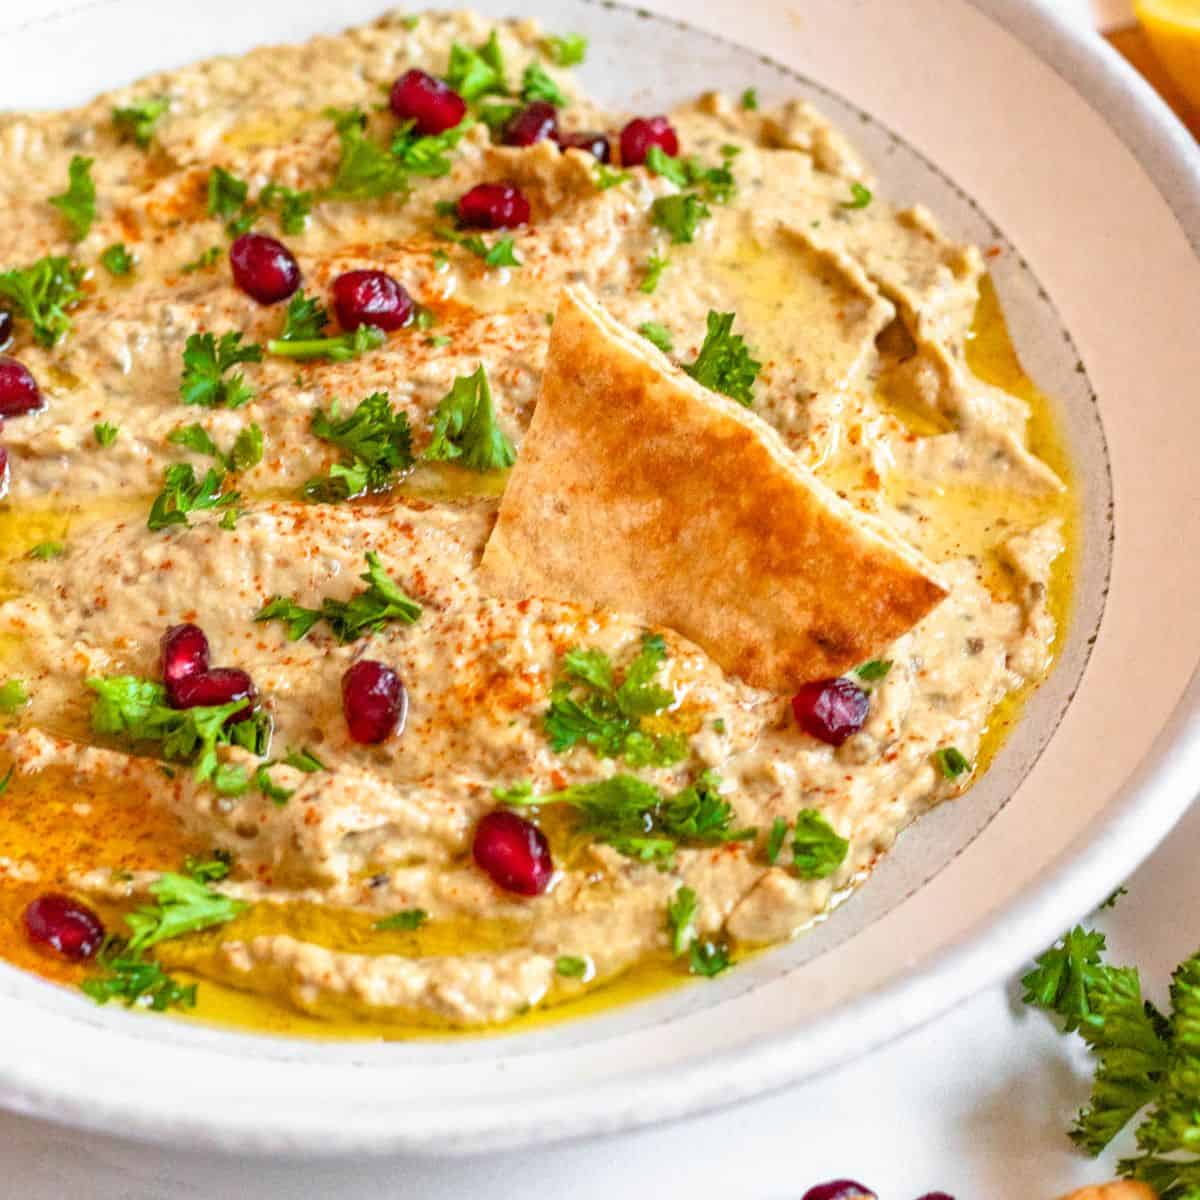 Pomegranate seeds topping baba ganoush with slice of pita bread dipping into it.